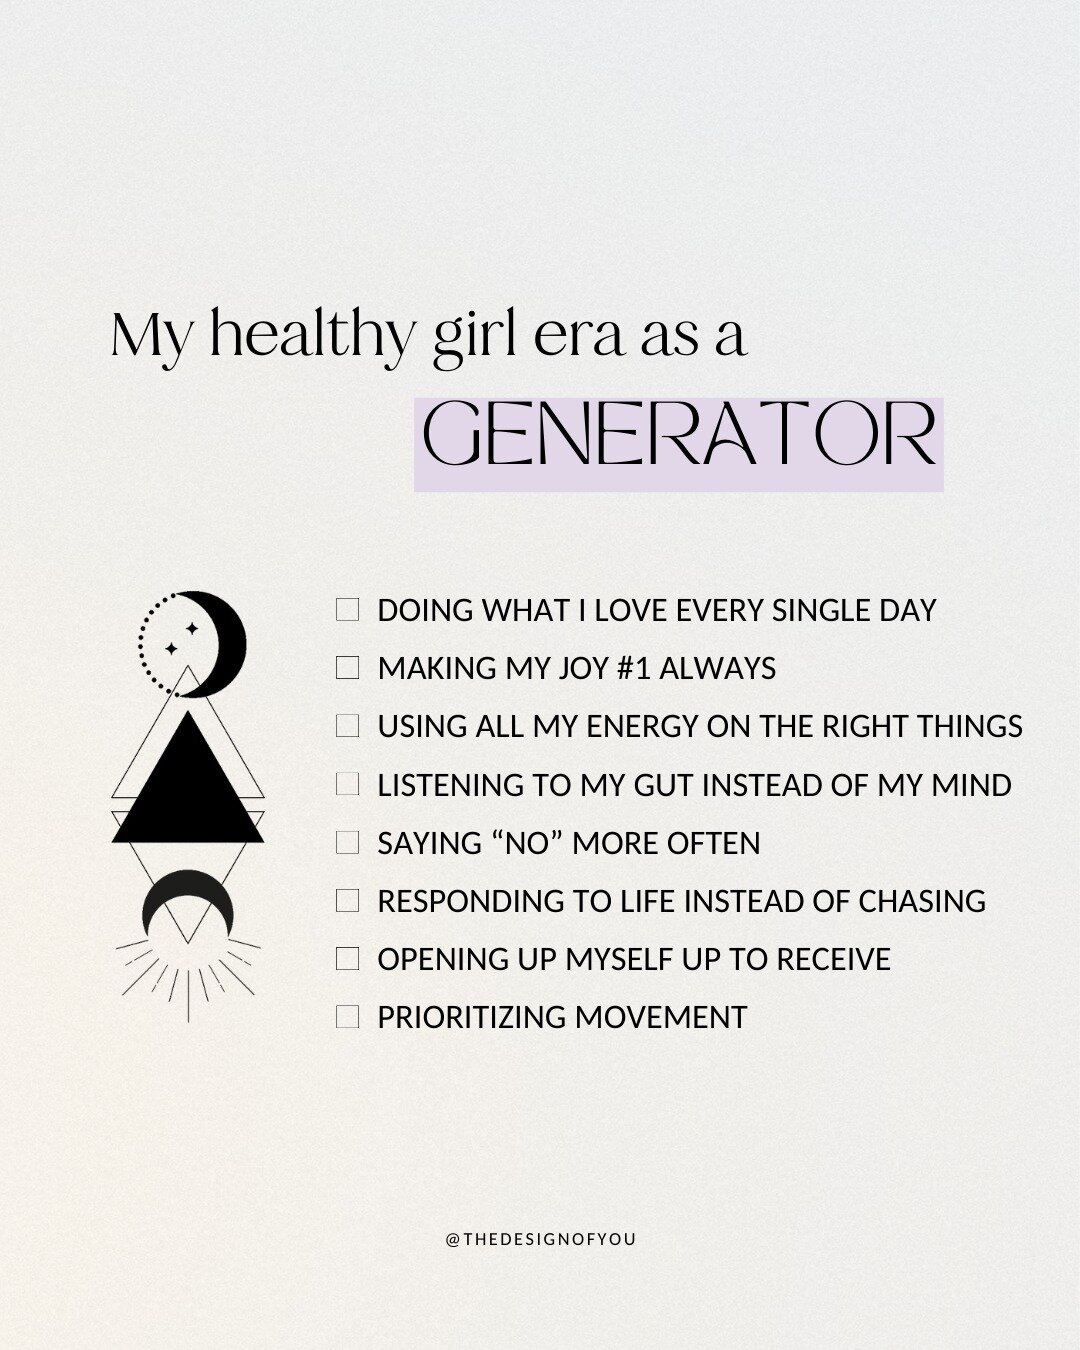 What your healthy girl era looks like in Human Design 💅

Swipe for yours, ladies 😘

The healthiest version of you honors and respects the way that your energy flows! 

💫 My Generators &ndash; a healthy you looks sparkly, warm, and inviting followi